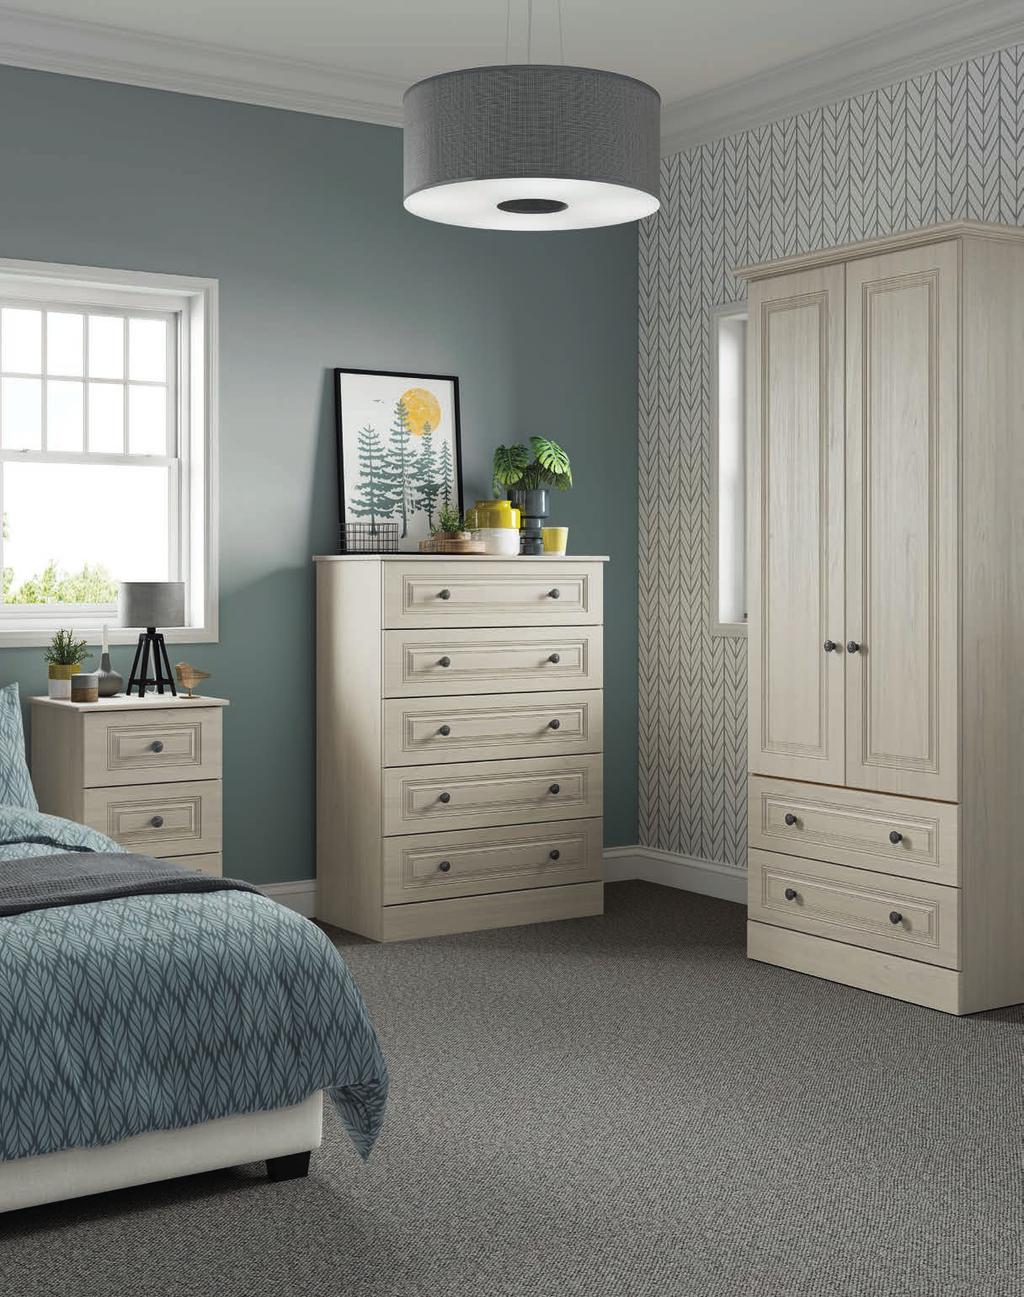 TOLEDO KINGSTOWN 53 TOLEDO TRADITIONAL IN style WITH A elegance. touchof This traditional and good value furniture looks great in the bedroom and comes in either warm oak or swiss elm finish.